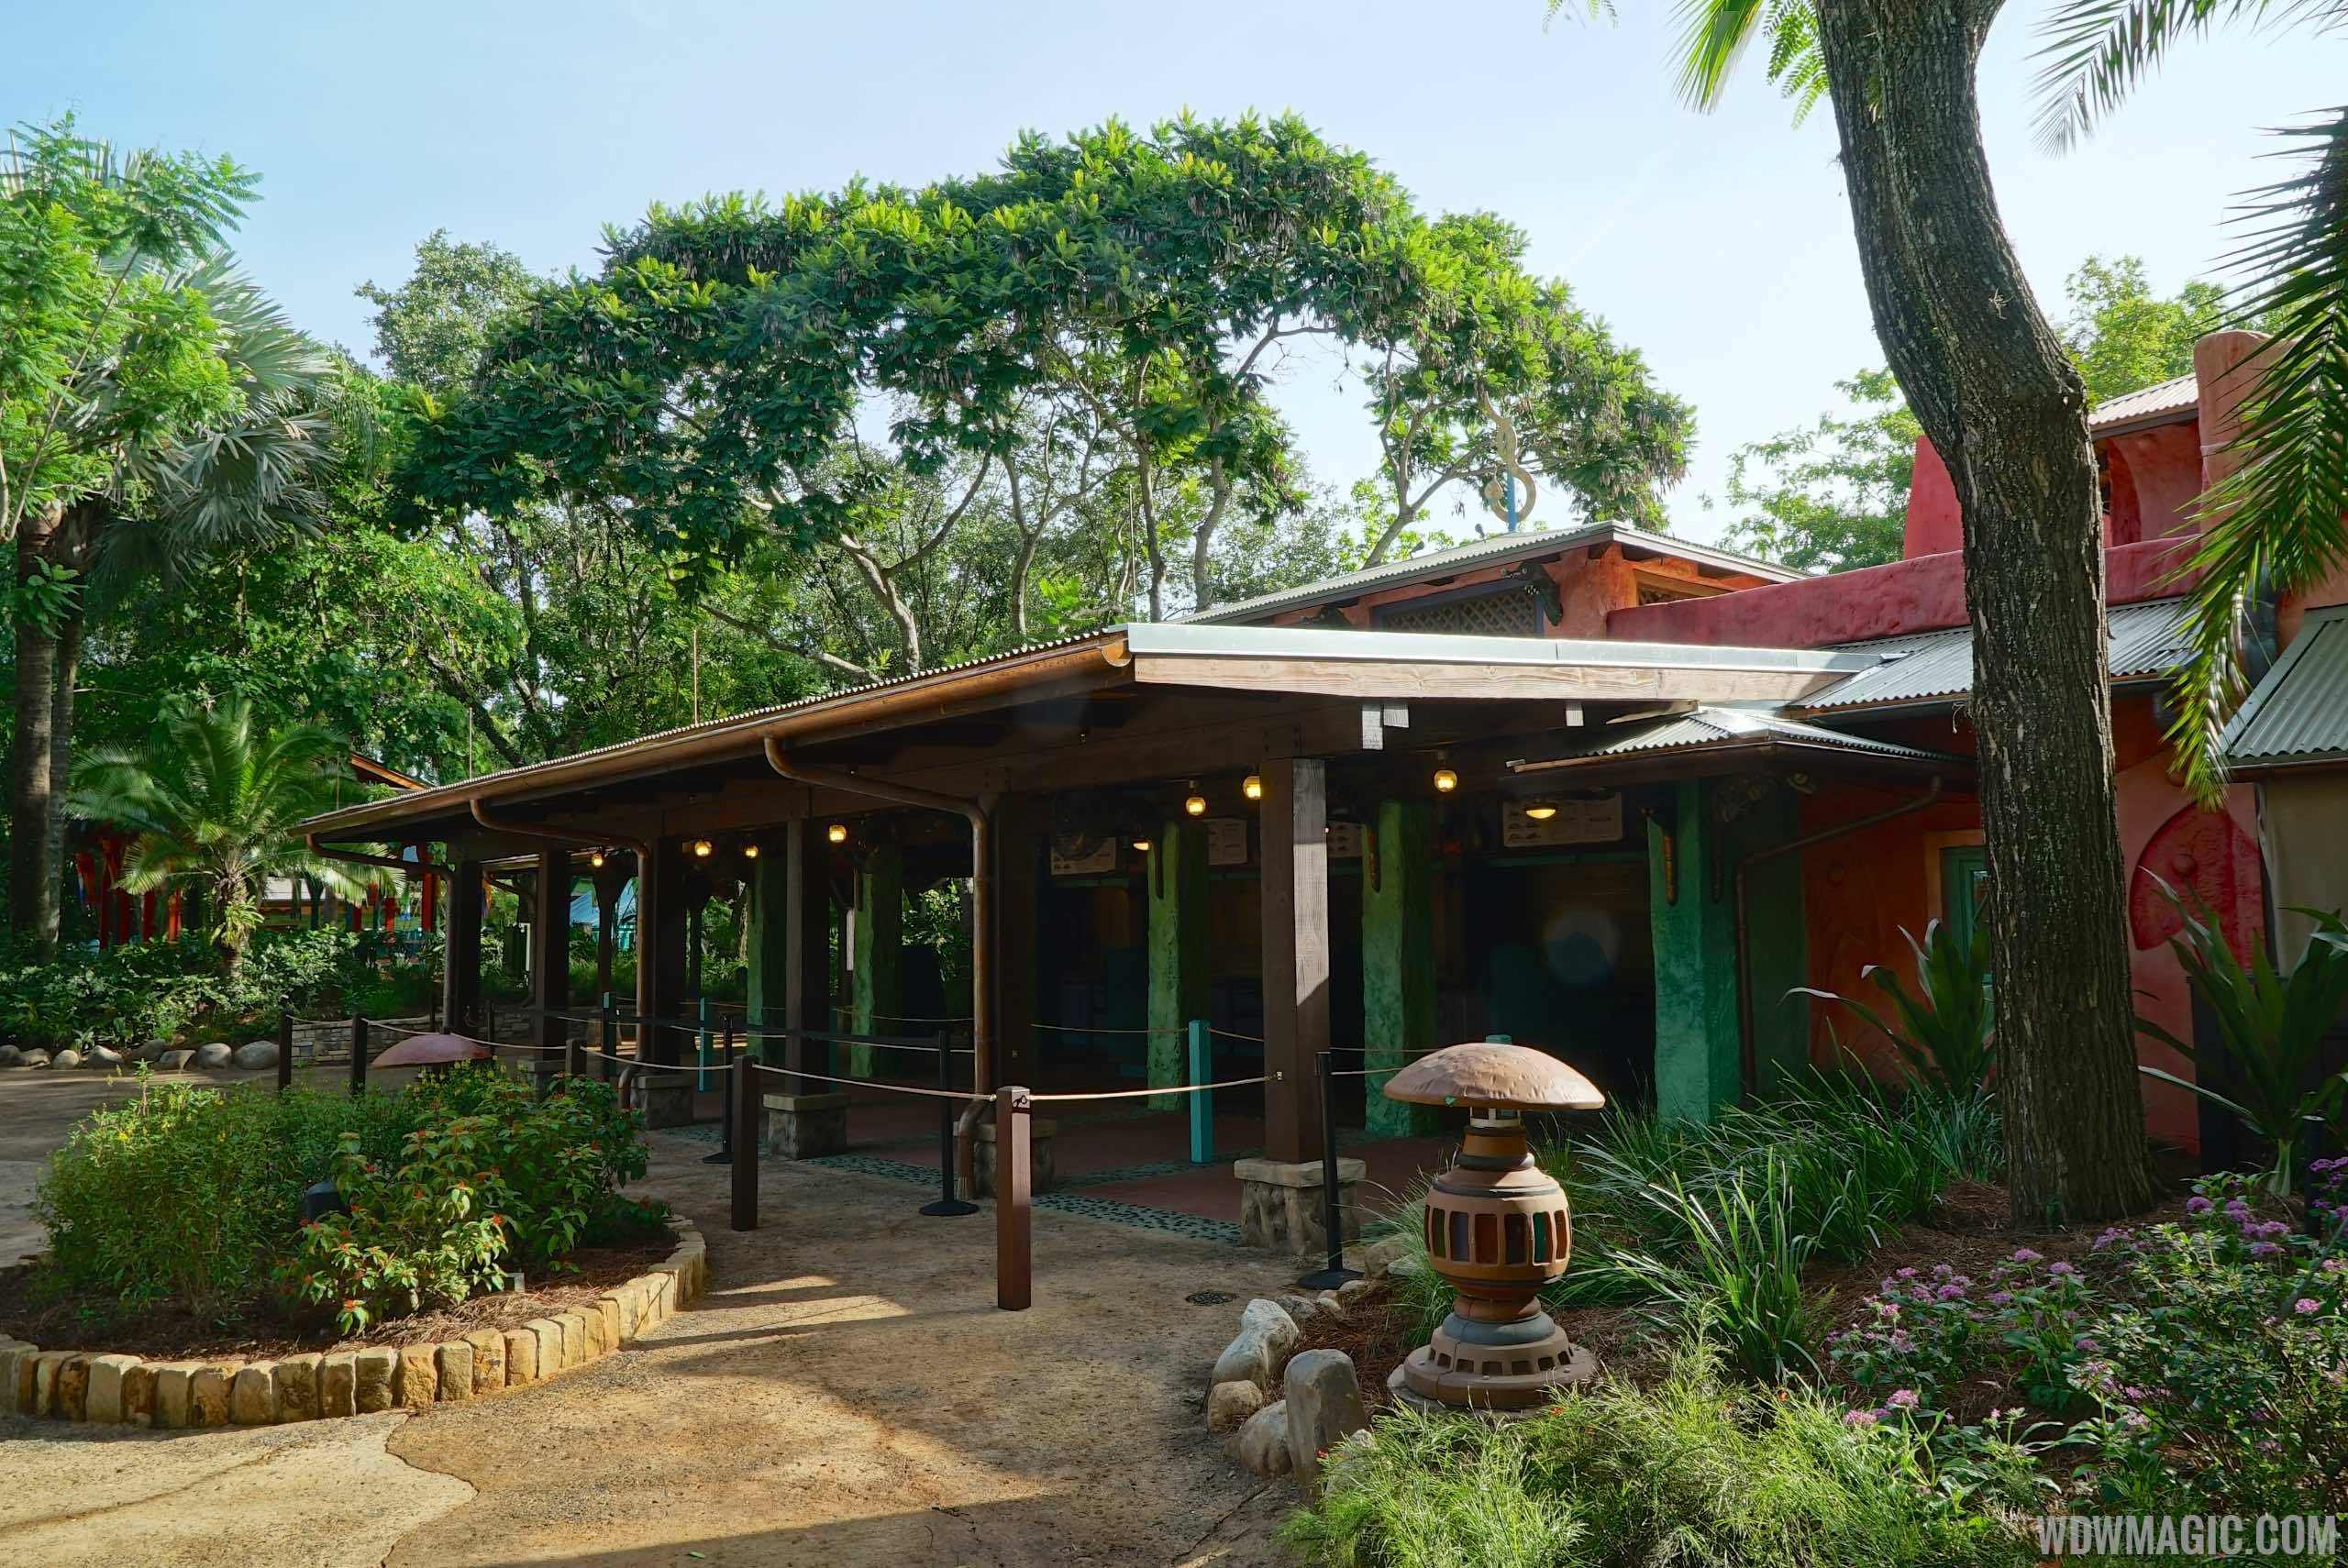 Flame Tree Barbecue after its refurbishment